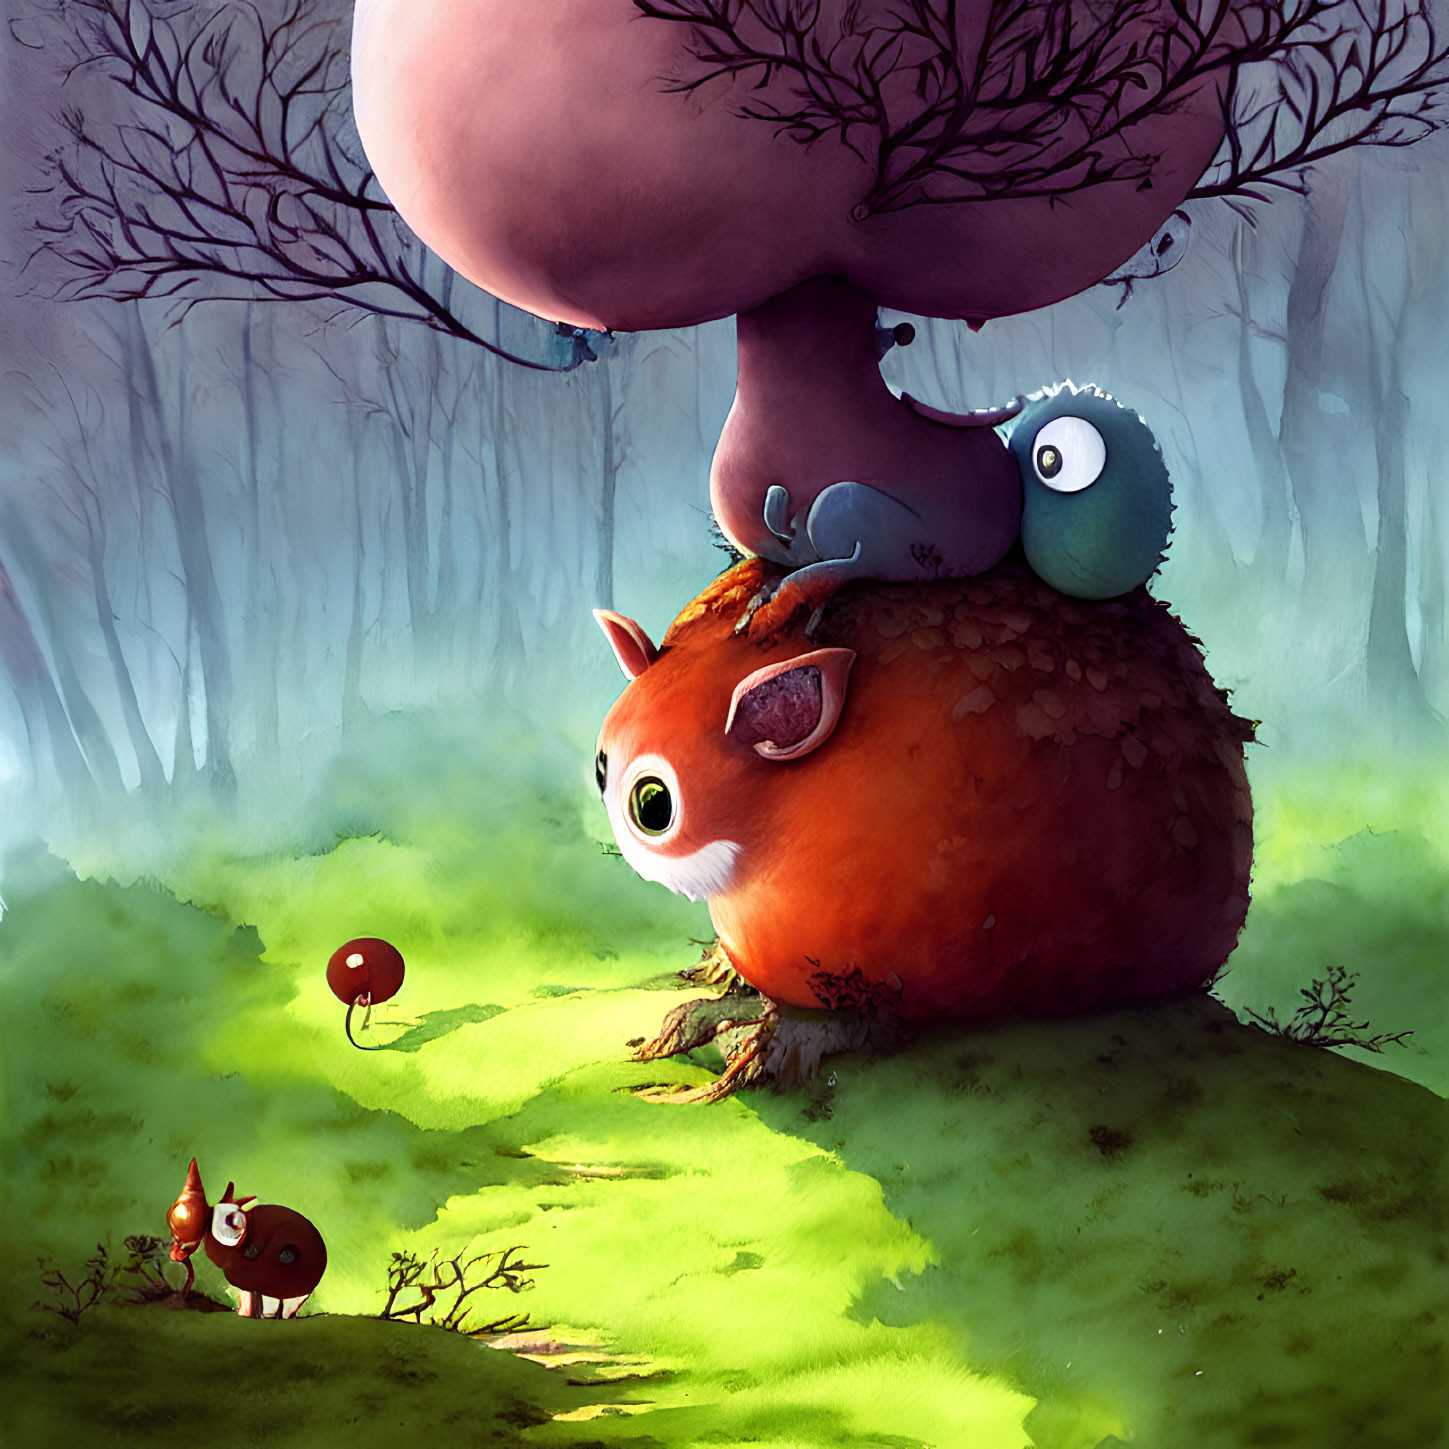 Illustration of Large Orange Creature with Small Creatures in Mystical Forest